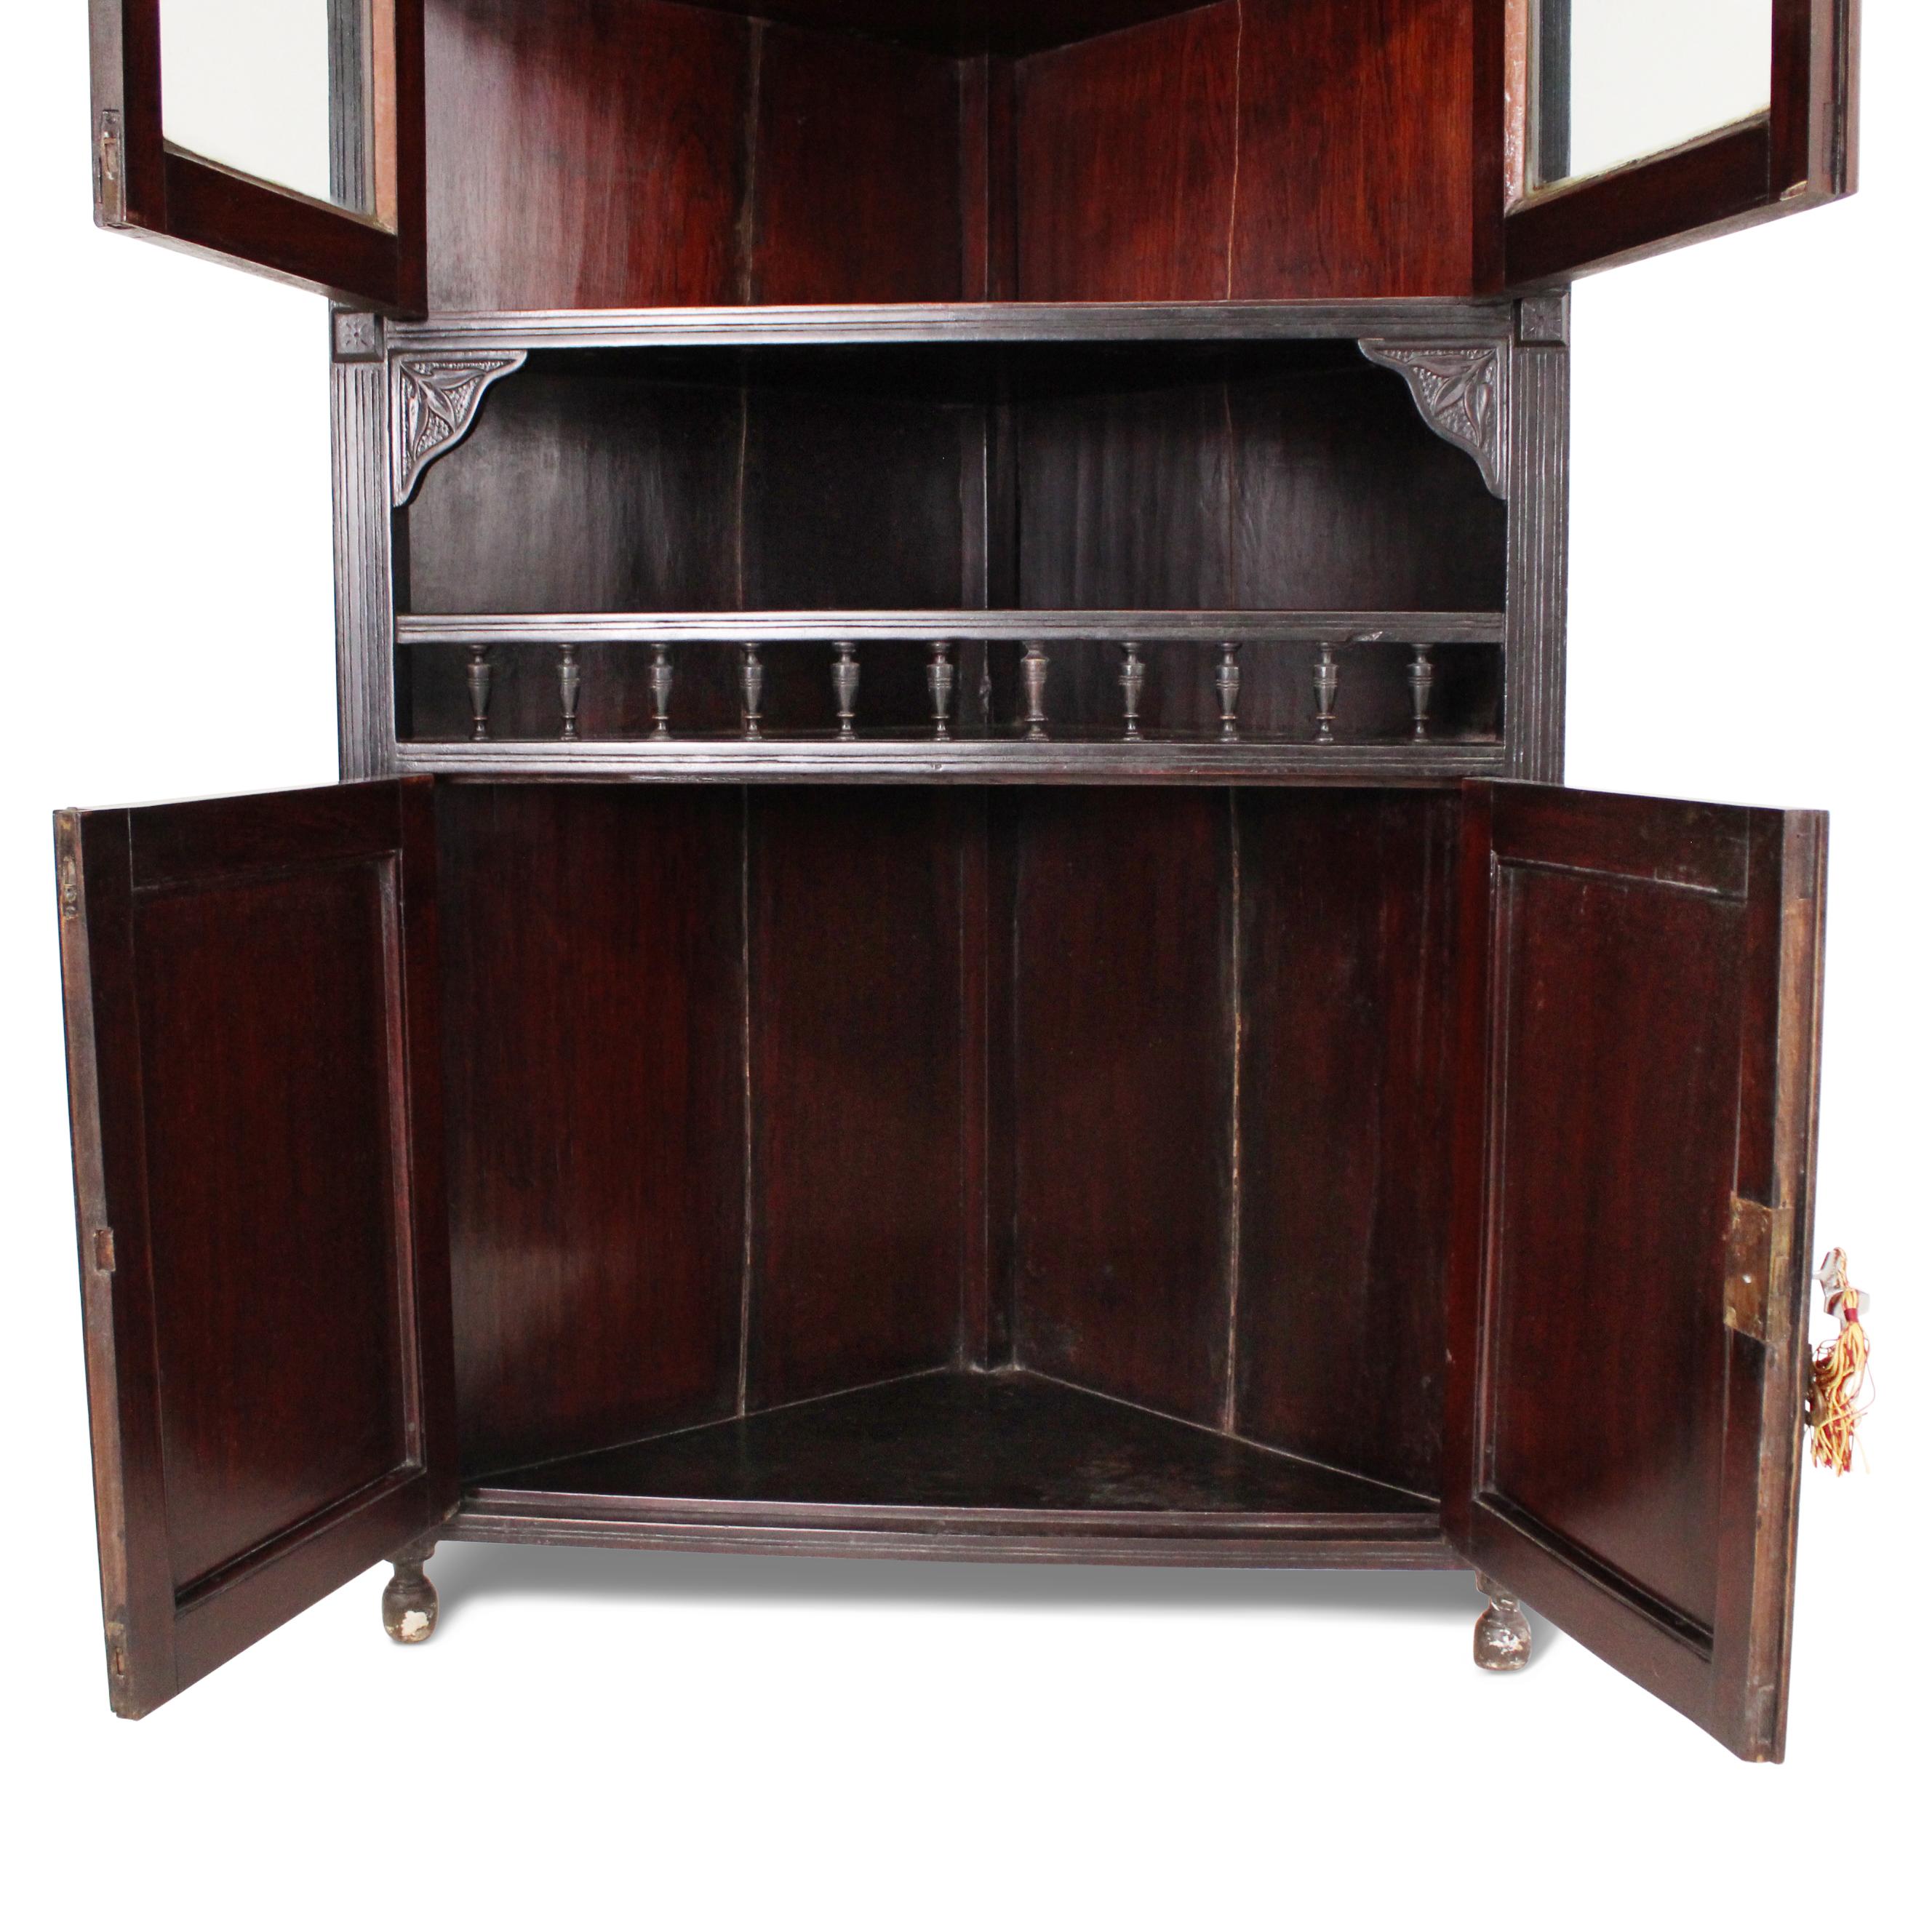 Late 19th Century Teak Corner Cabinet From an Indian Palace 2